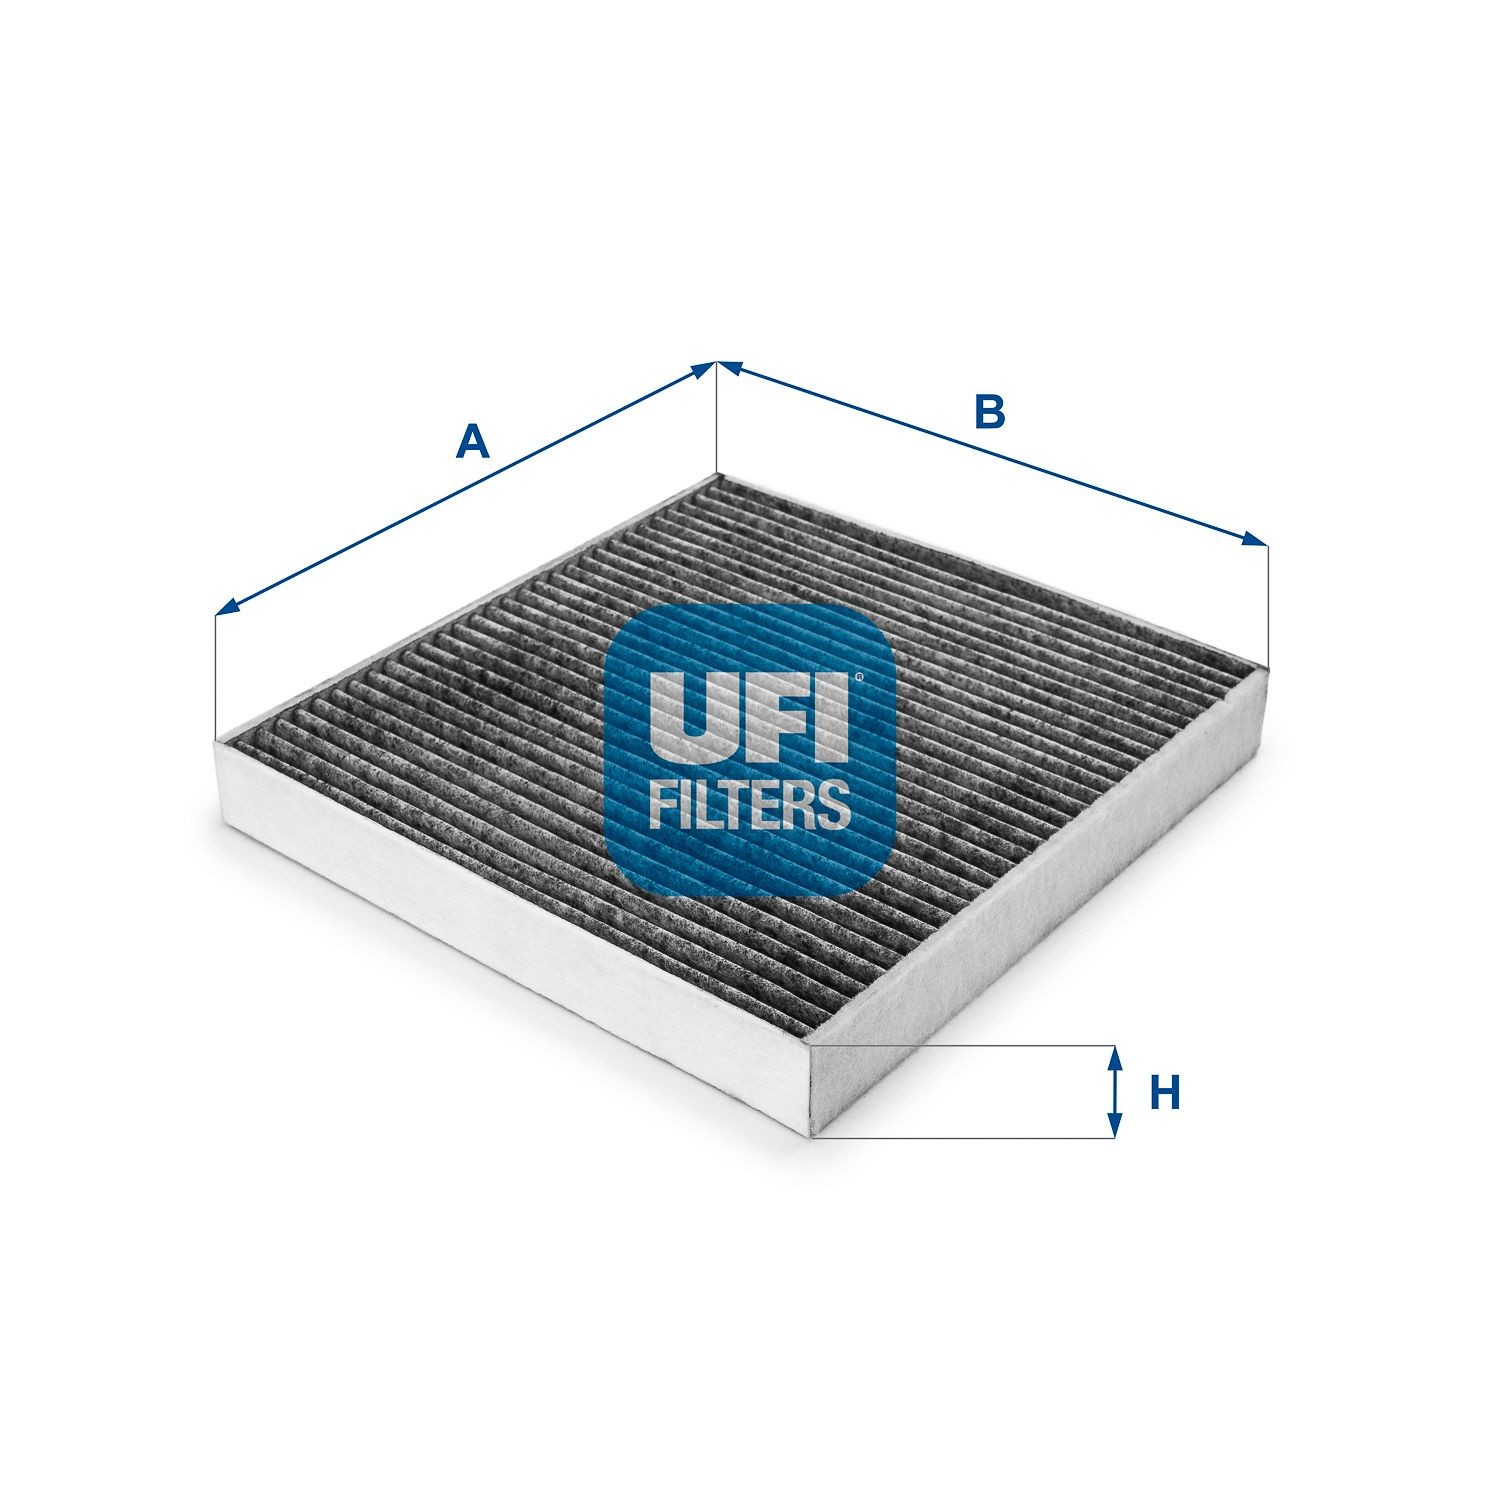 UFI 54.219.00 Air conditioner filter Activated Carbon Filter, 255 mm x 234 mm x 30 mm